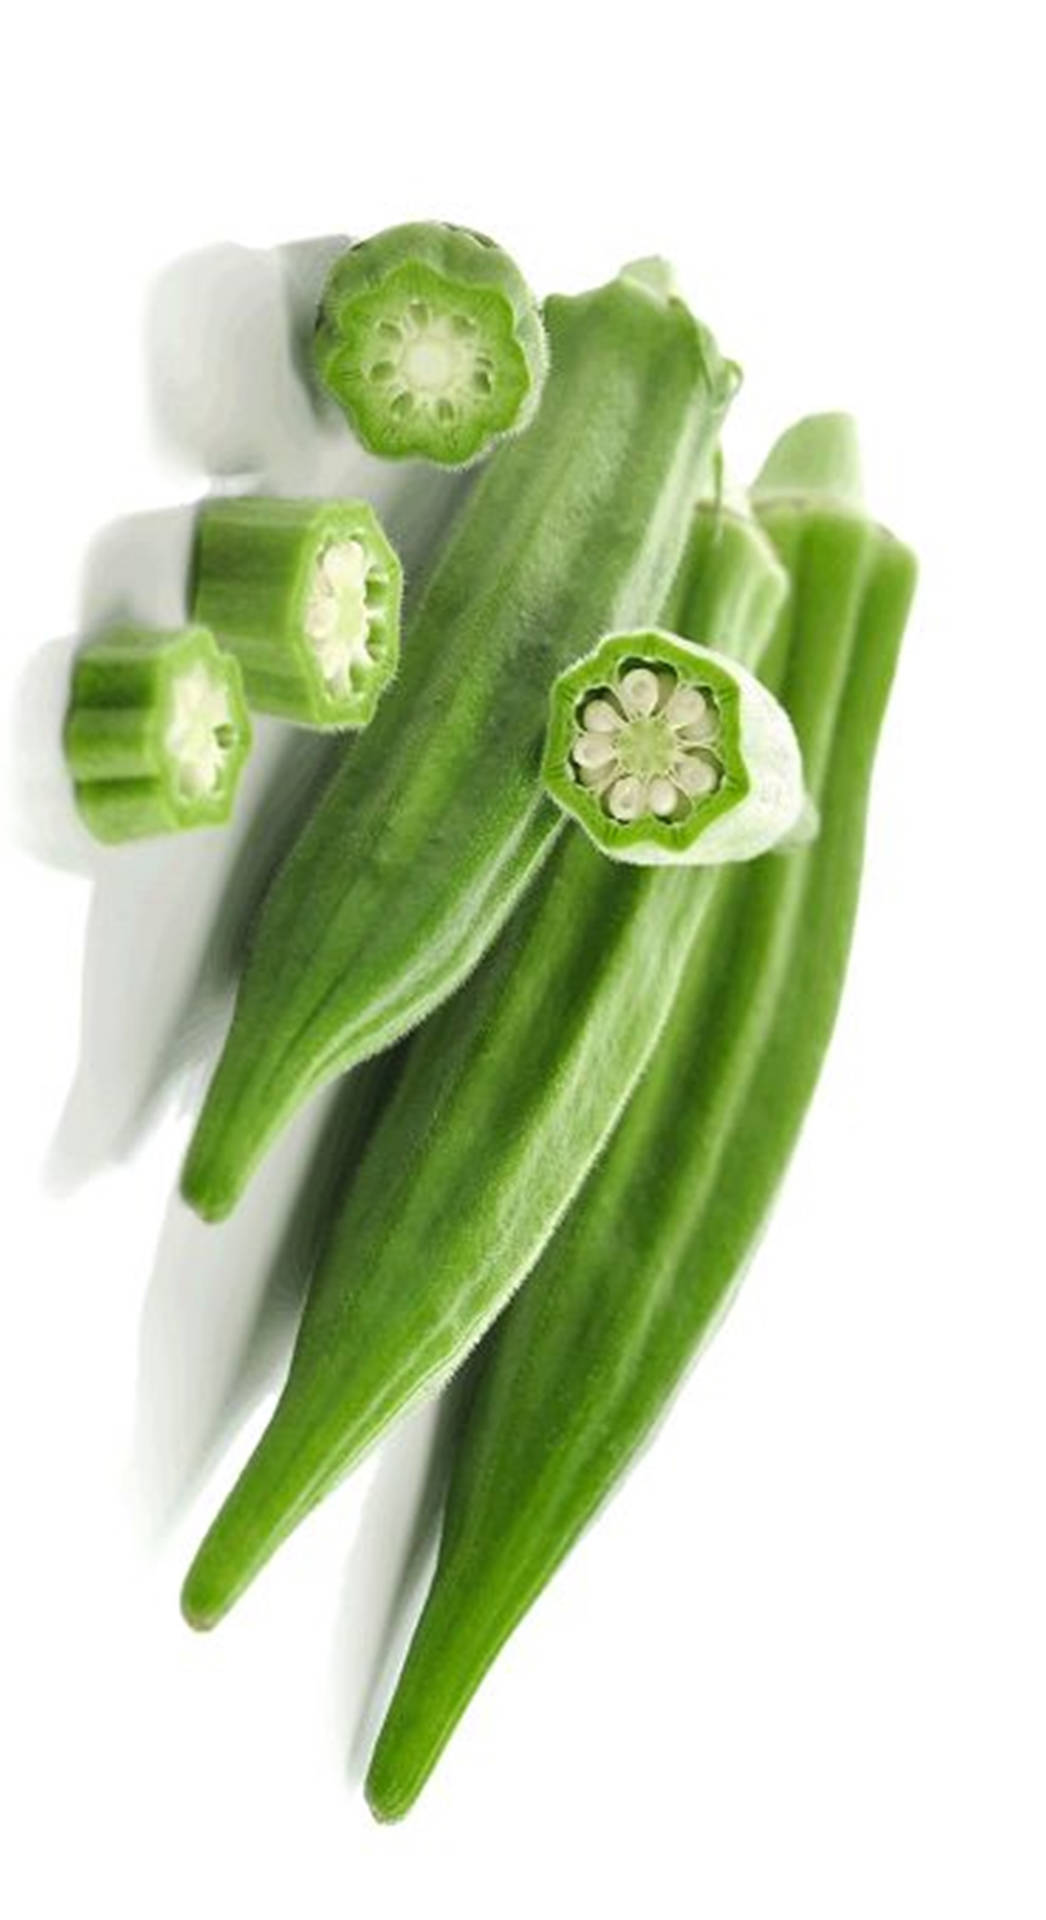 Okra Vegetable With Slices Wallpaper